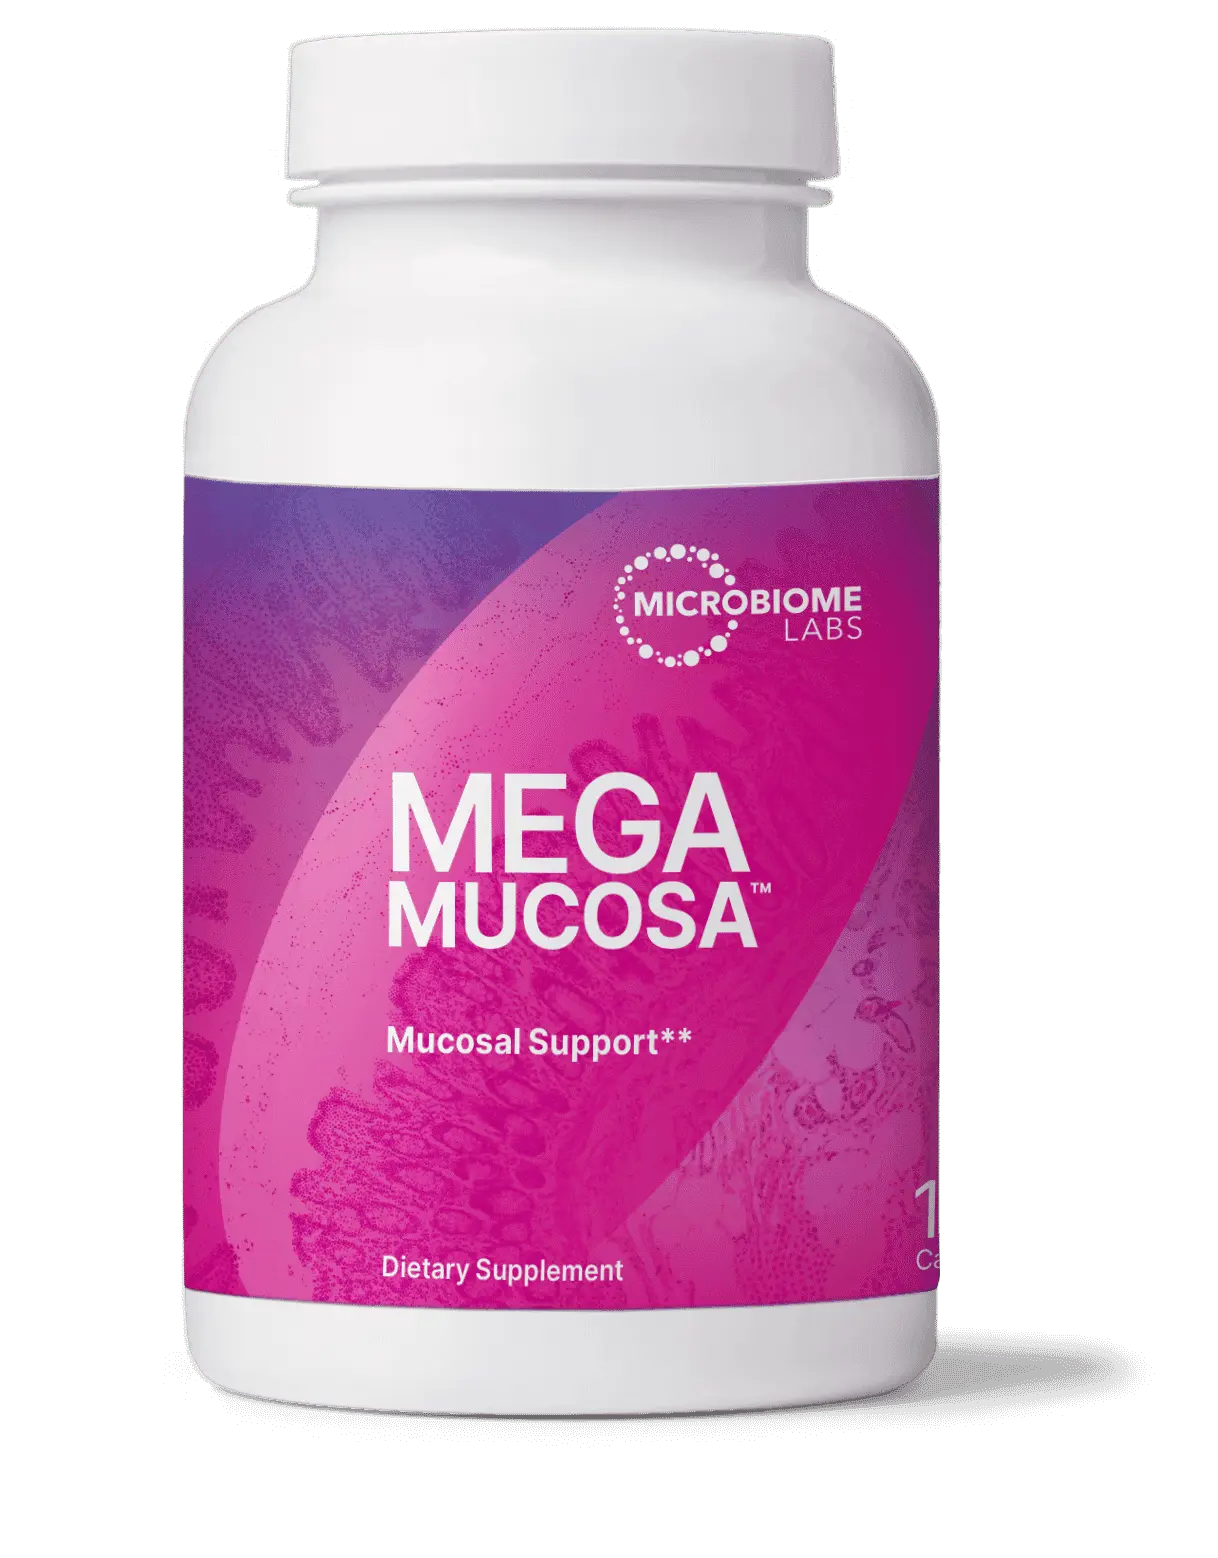 MegaMucosa is the first complete mucosal support supplement of its kind, formulated to REBUILD a healthy mucosal barrier.